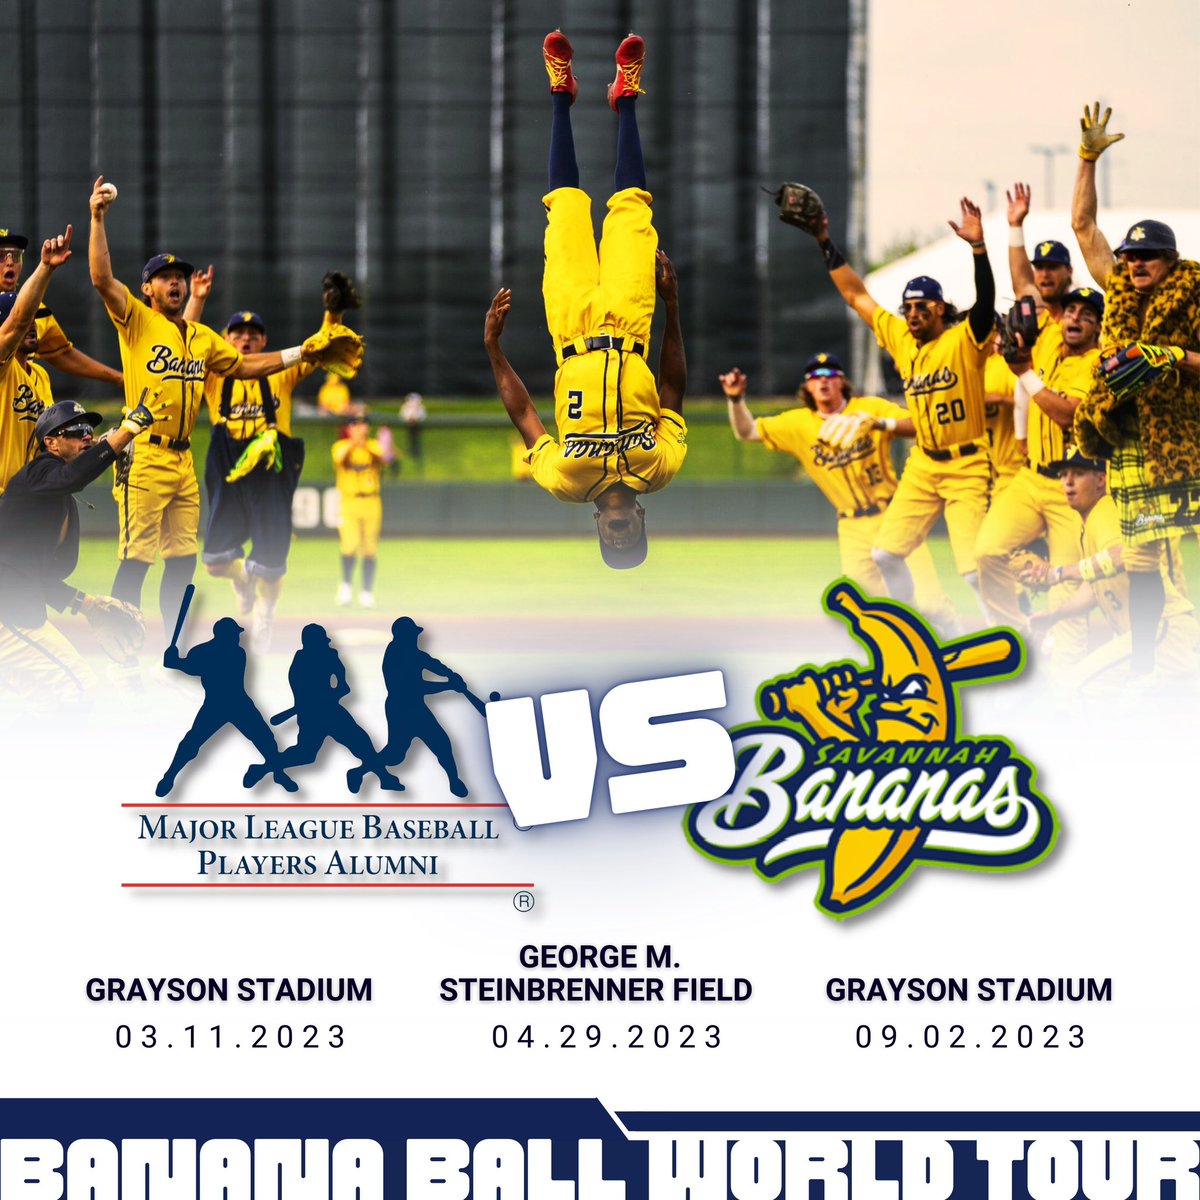 See the world famous Savannah Bananas in action when they bring banana ball to Tampa Bay on April 29th… don’t miss @TheSavBananas at @GMSField for one night only! 🍌⚾️ 